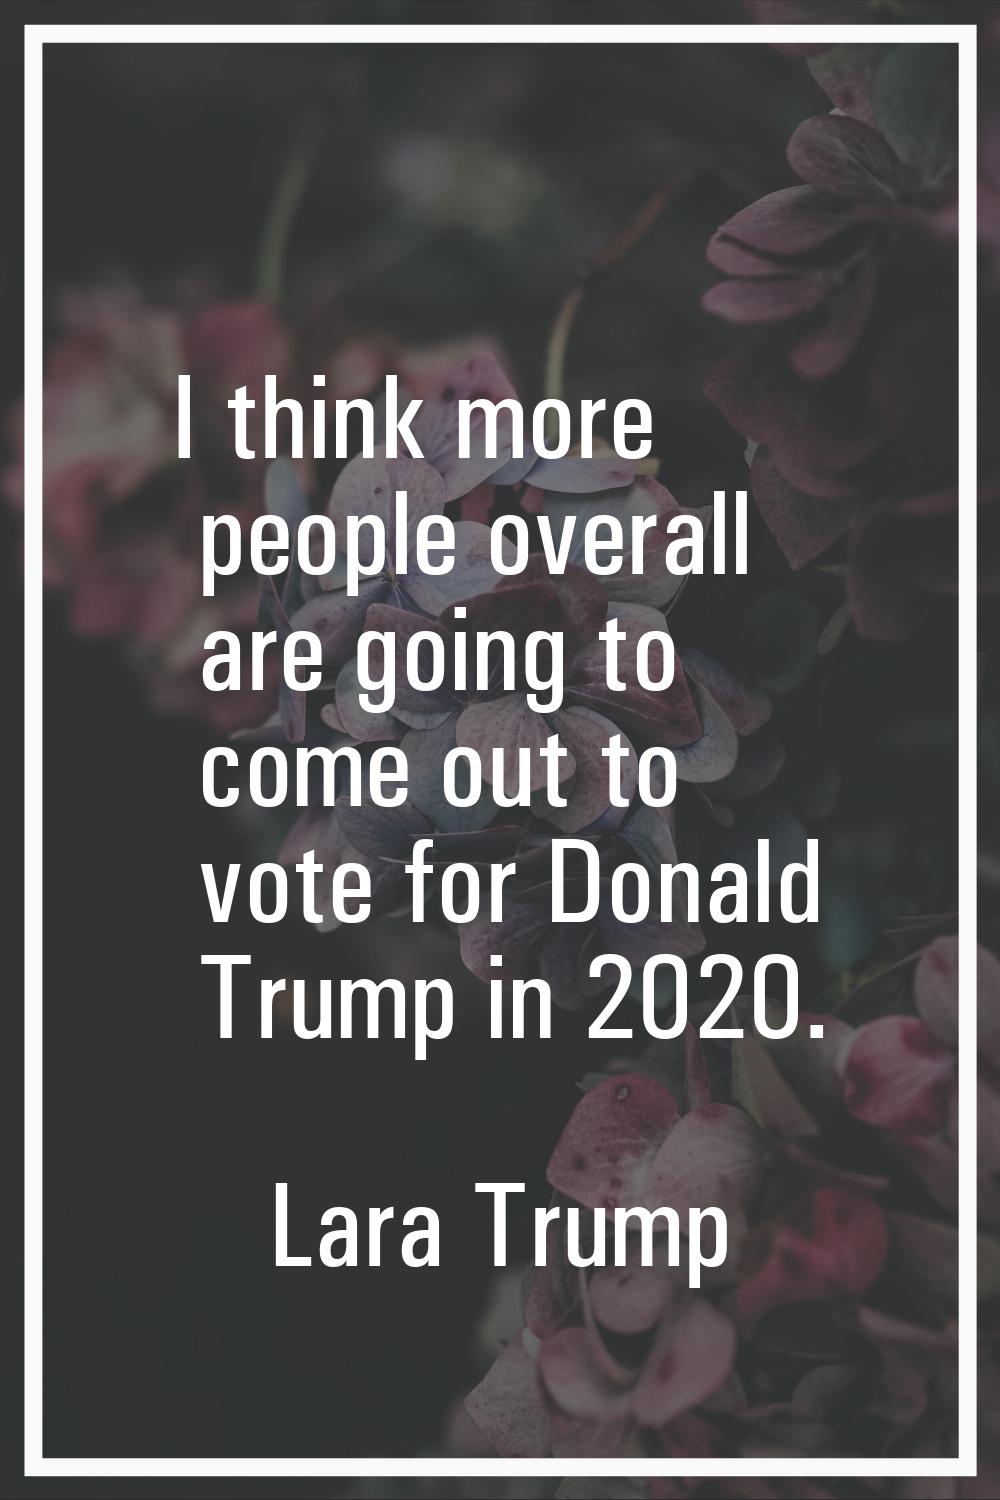 I think more people overall are going to come out to vote for Donald Trump in 2020.